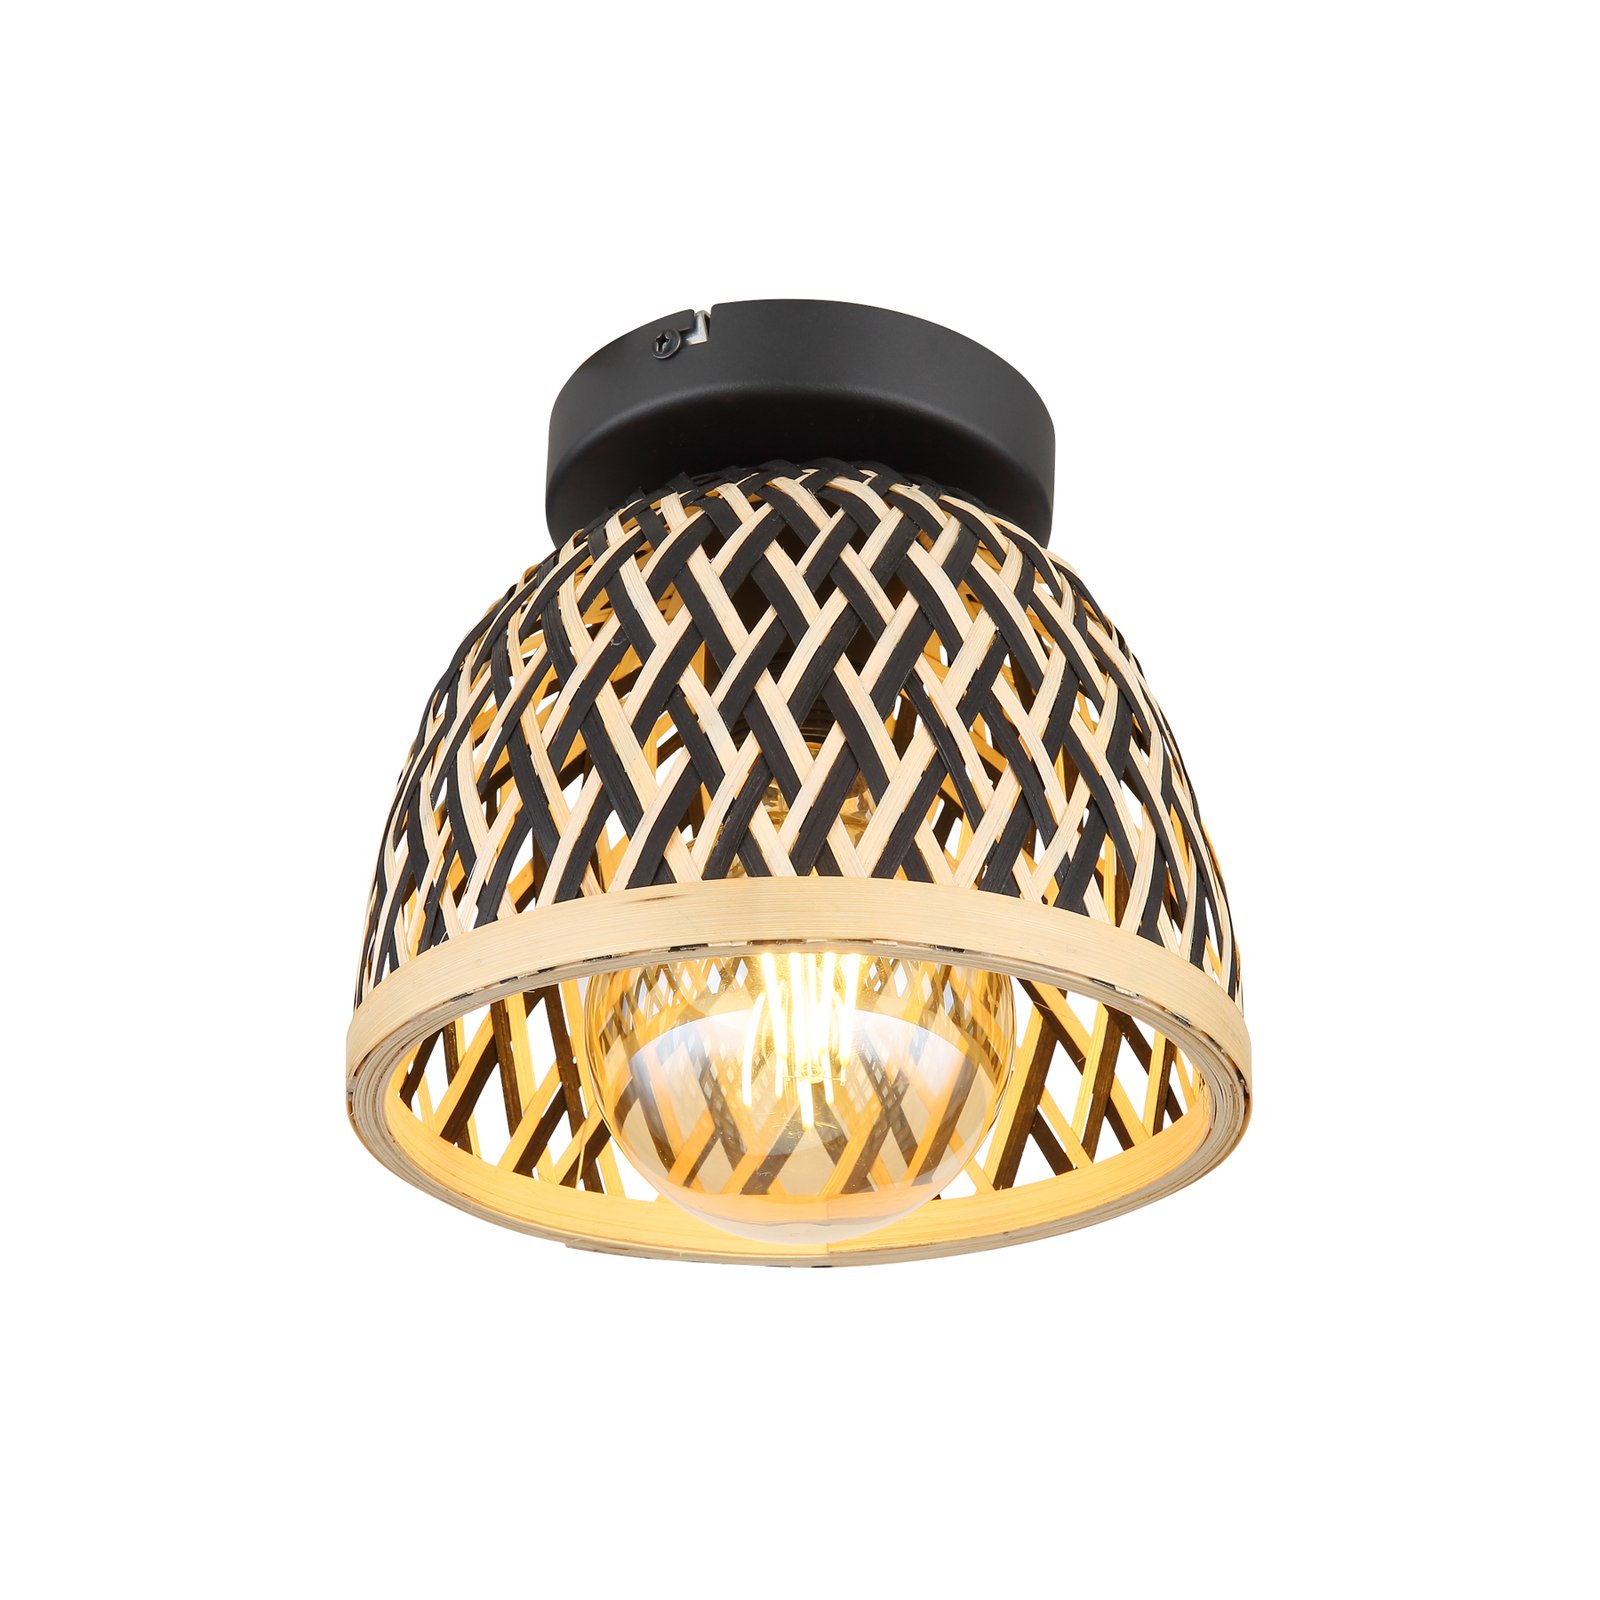 Colly ceiling light lampshade Bamboo wickerwork Ø 20cm